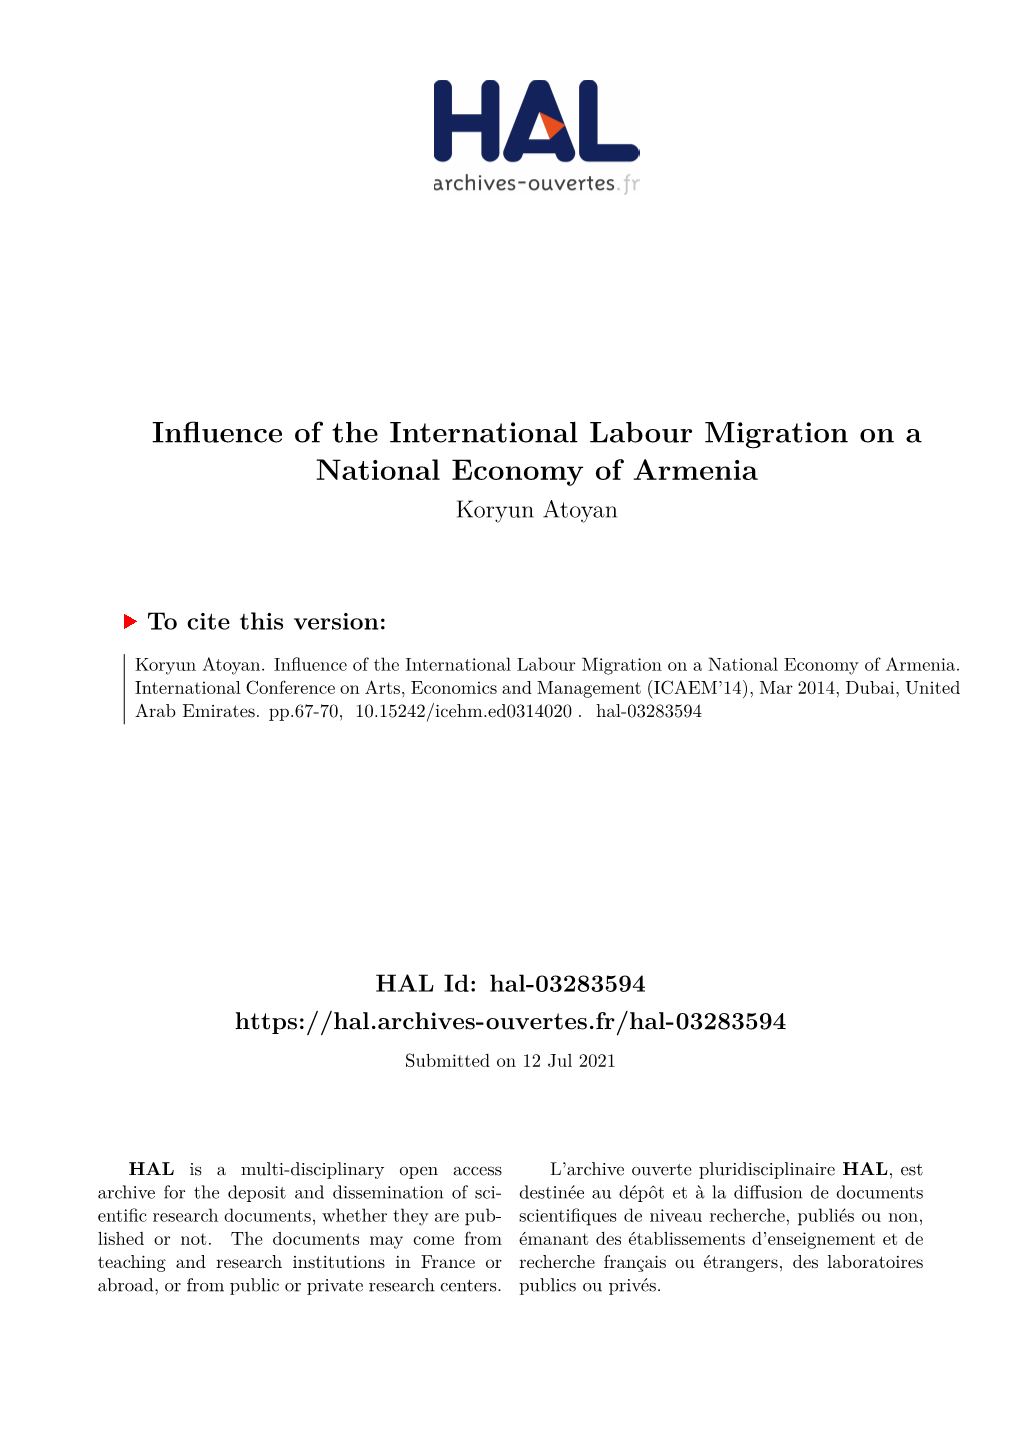 Influence of the International Labour Migration on a National Economy of Armenia